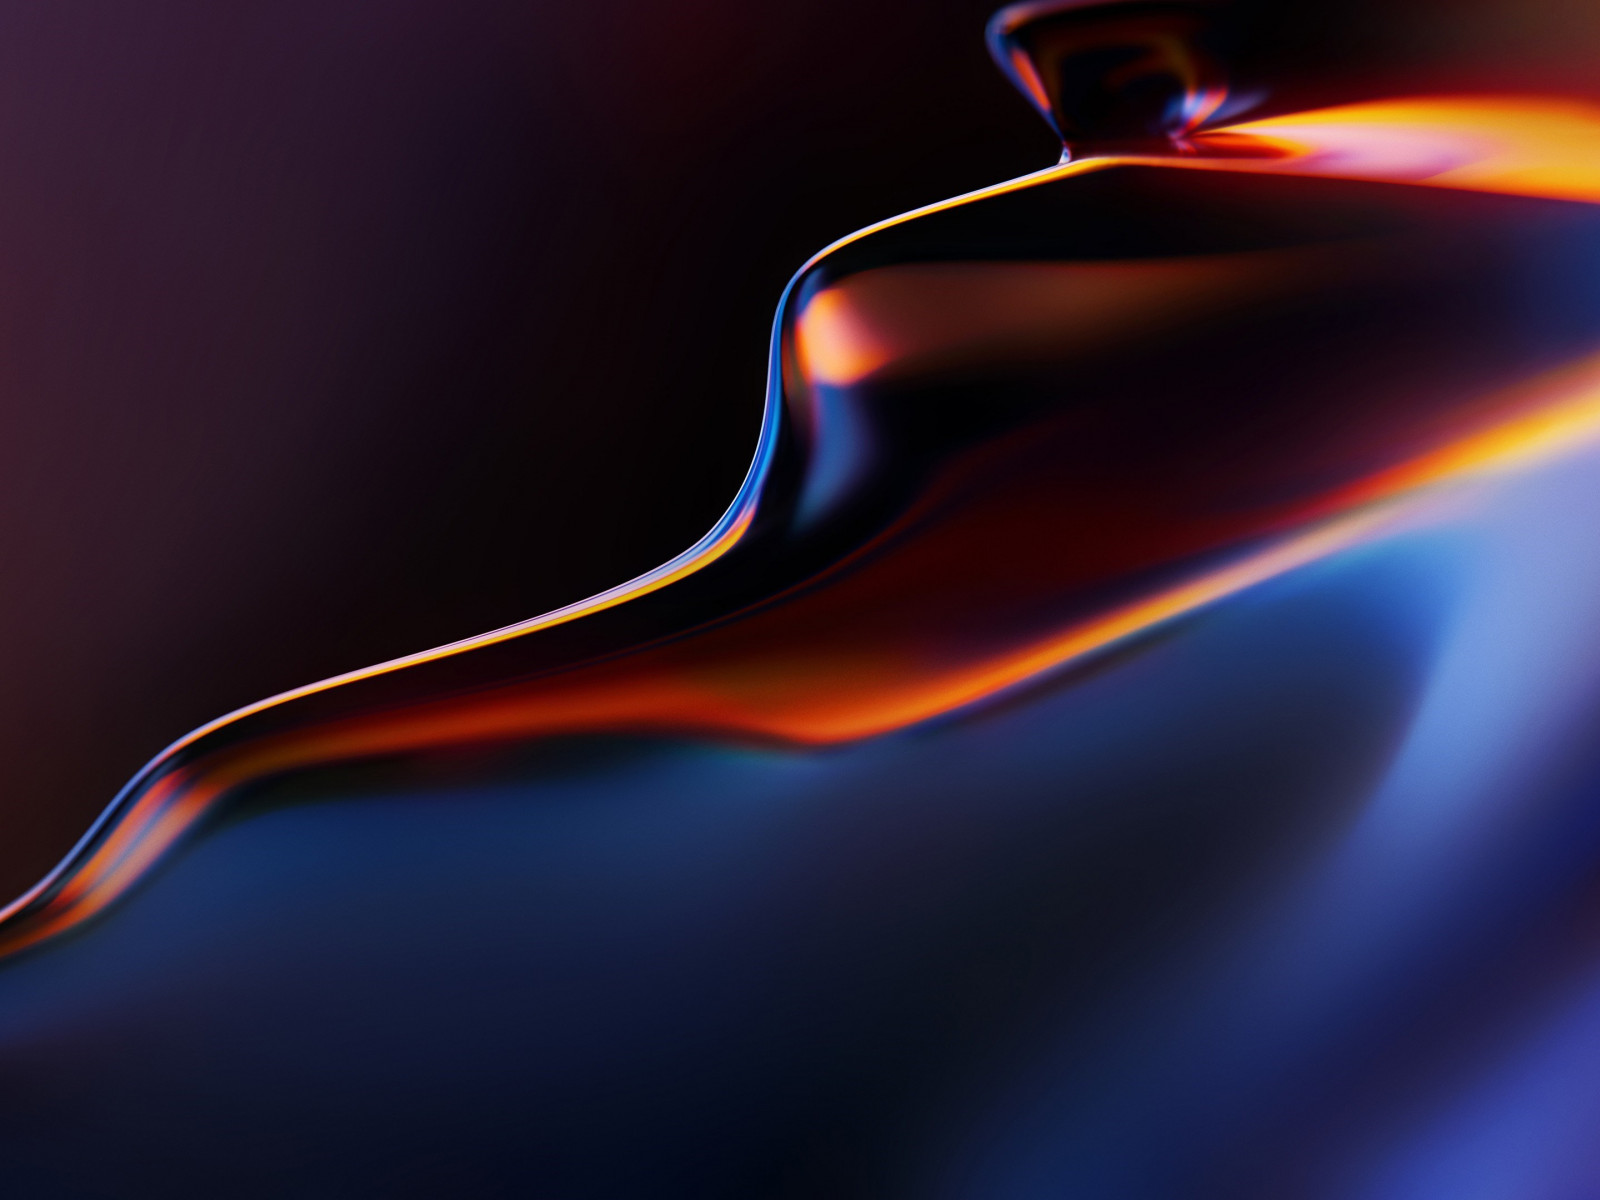 Abstract, flow, OnePlus 6T wallpaper 1600x1200